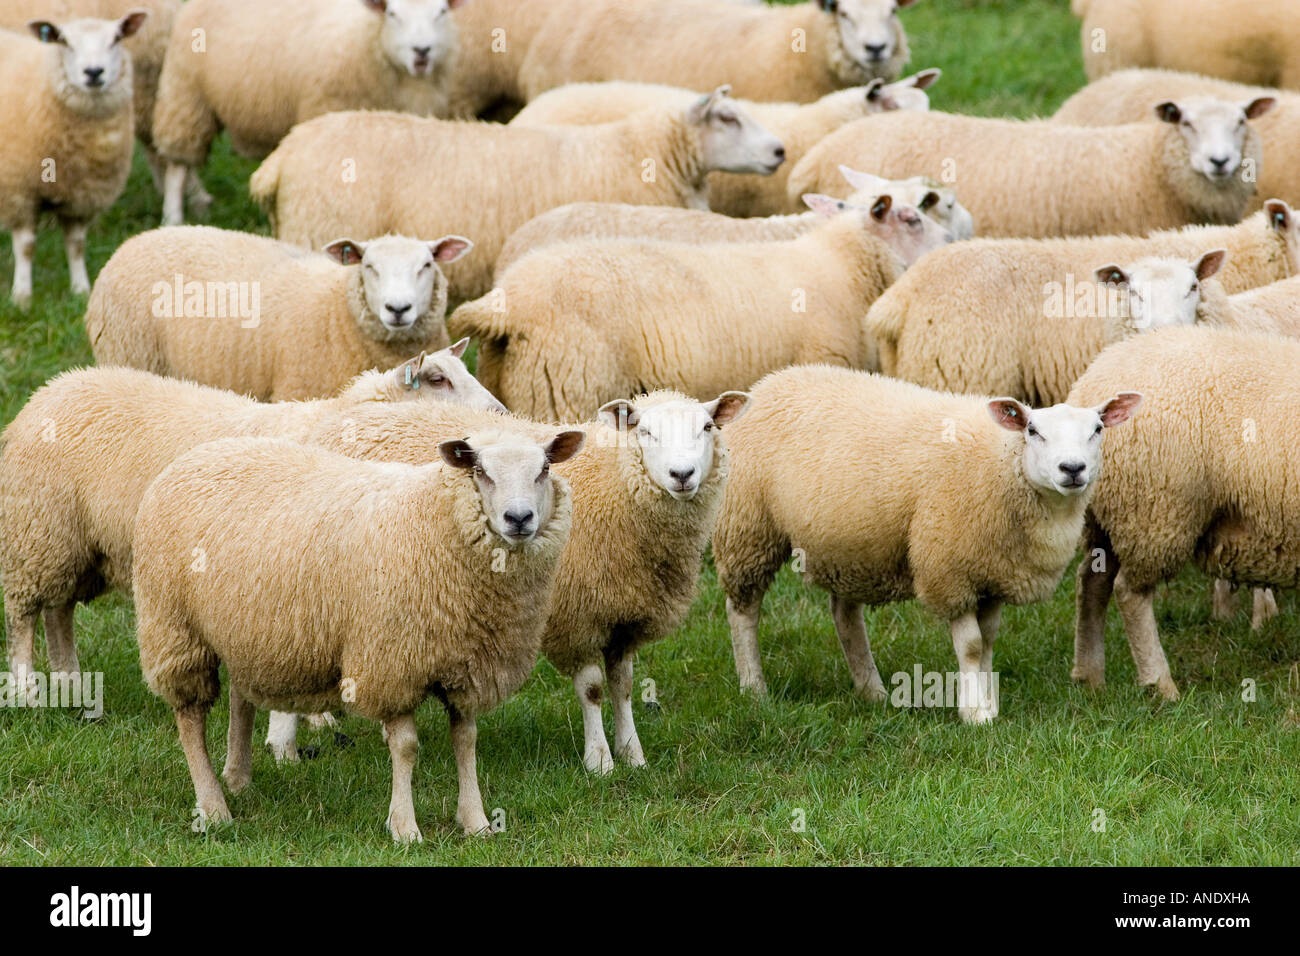 Flock of sheep grazing in a field Oxfordshire England Stock Photo